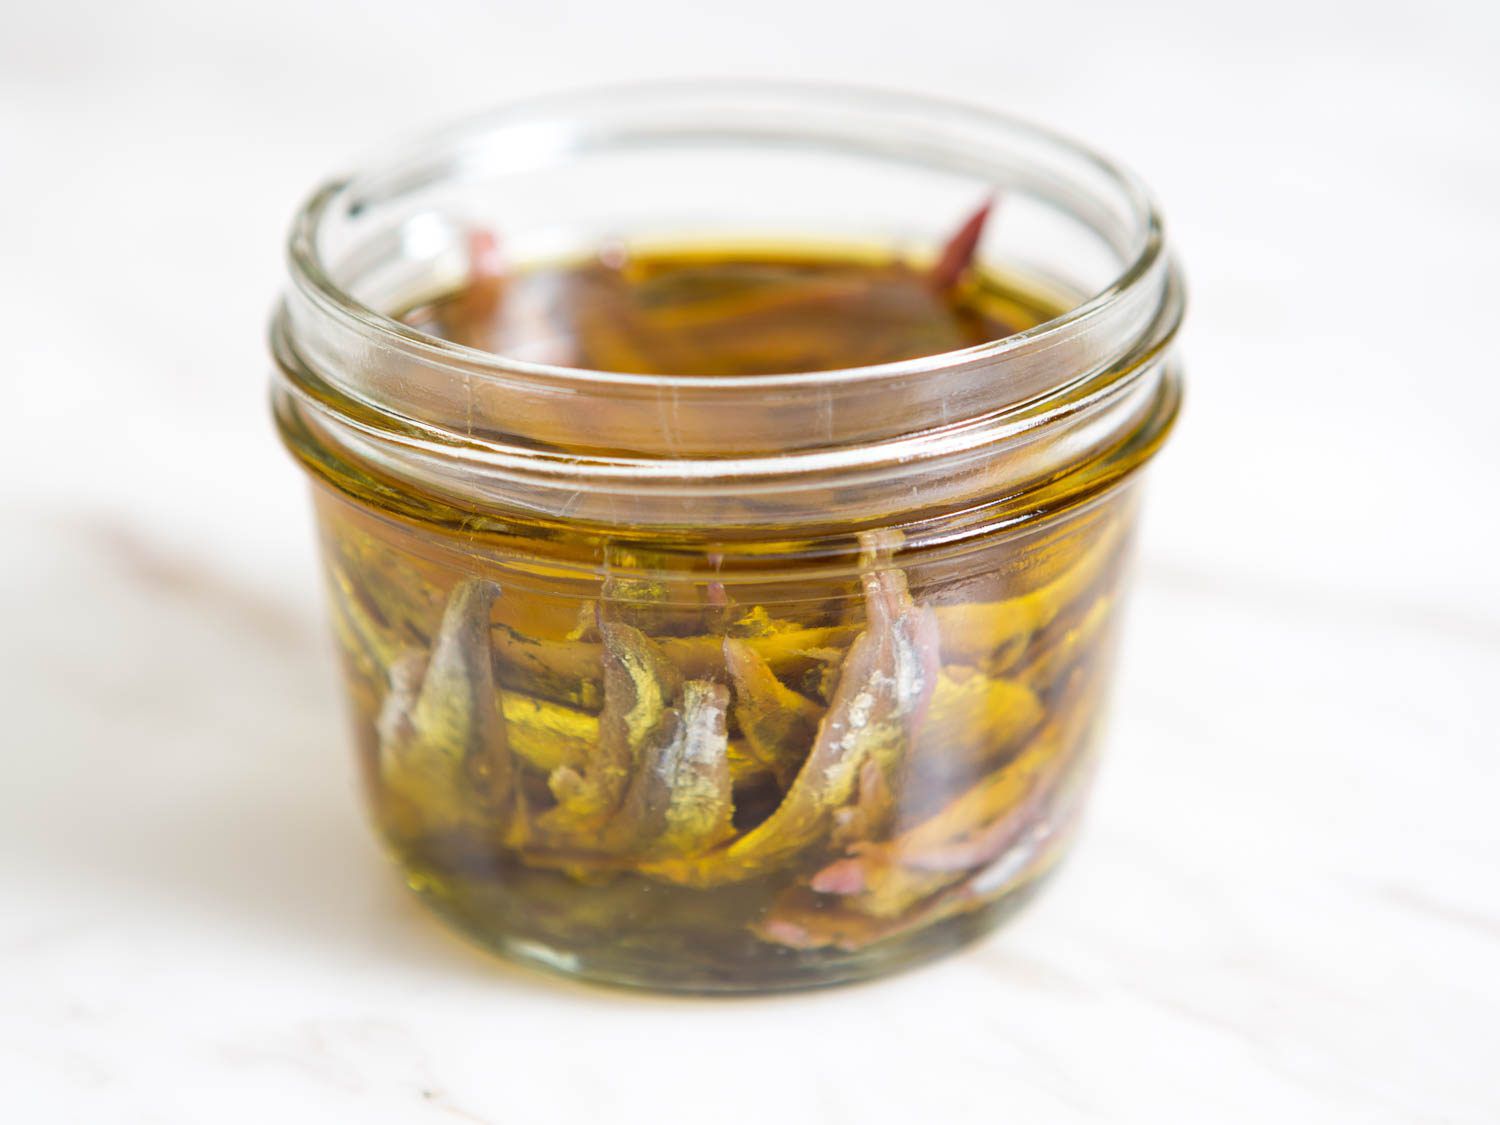 Small jar of anchovies in oil against white background.